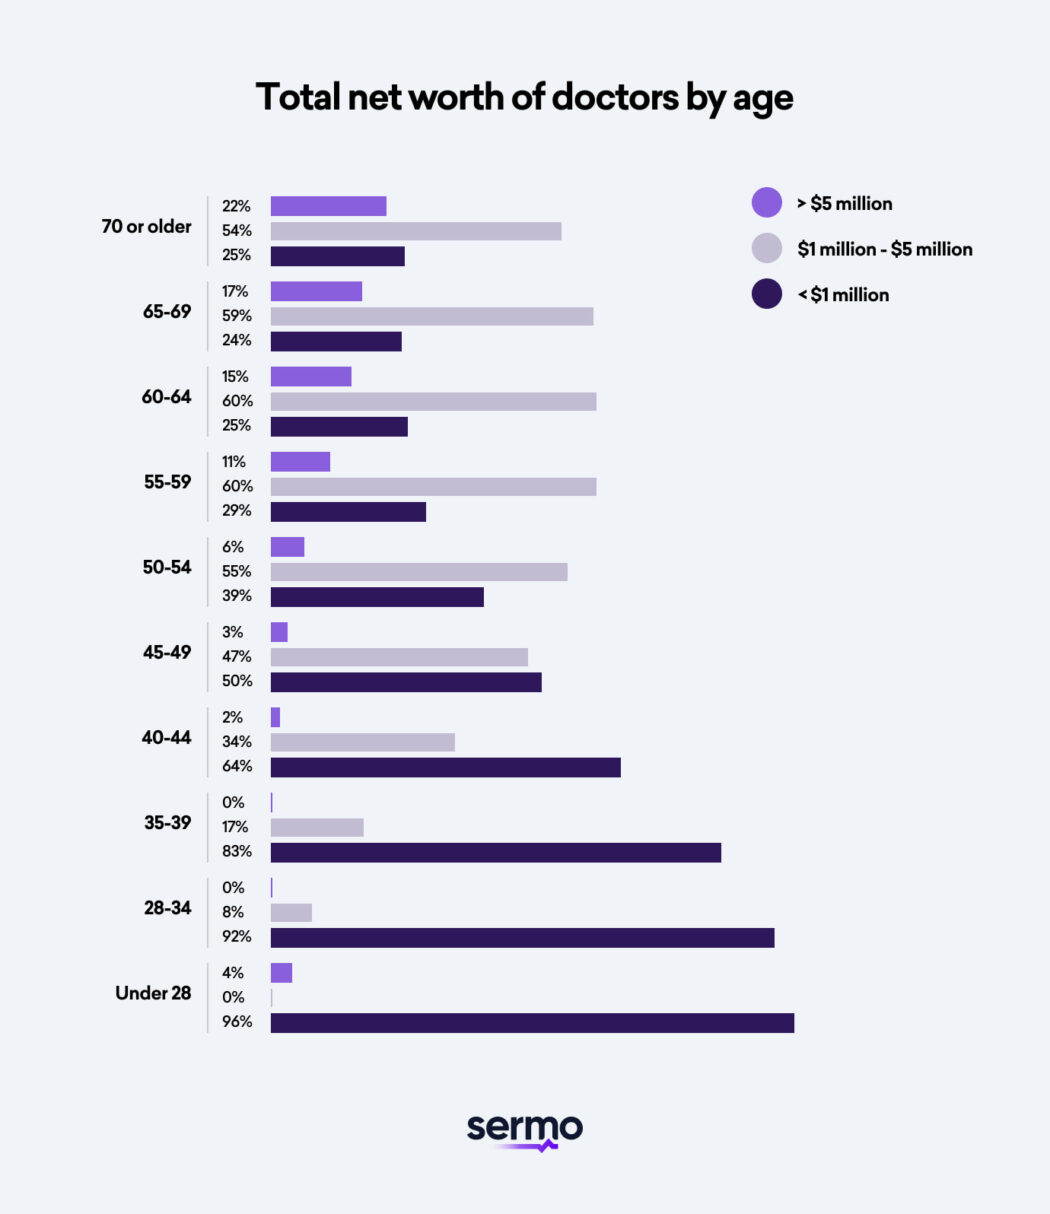 Total Net Worth of Doctors by age according to White Coat Investor